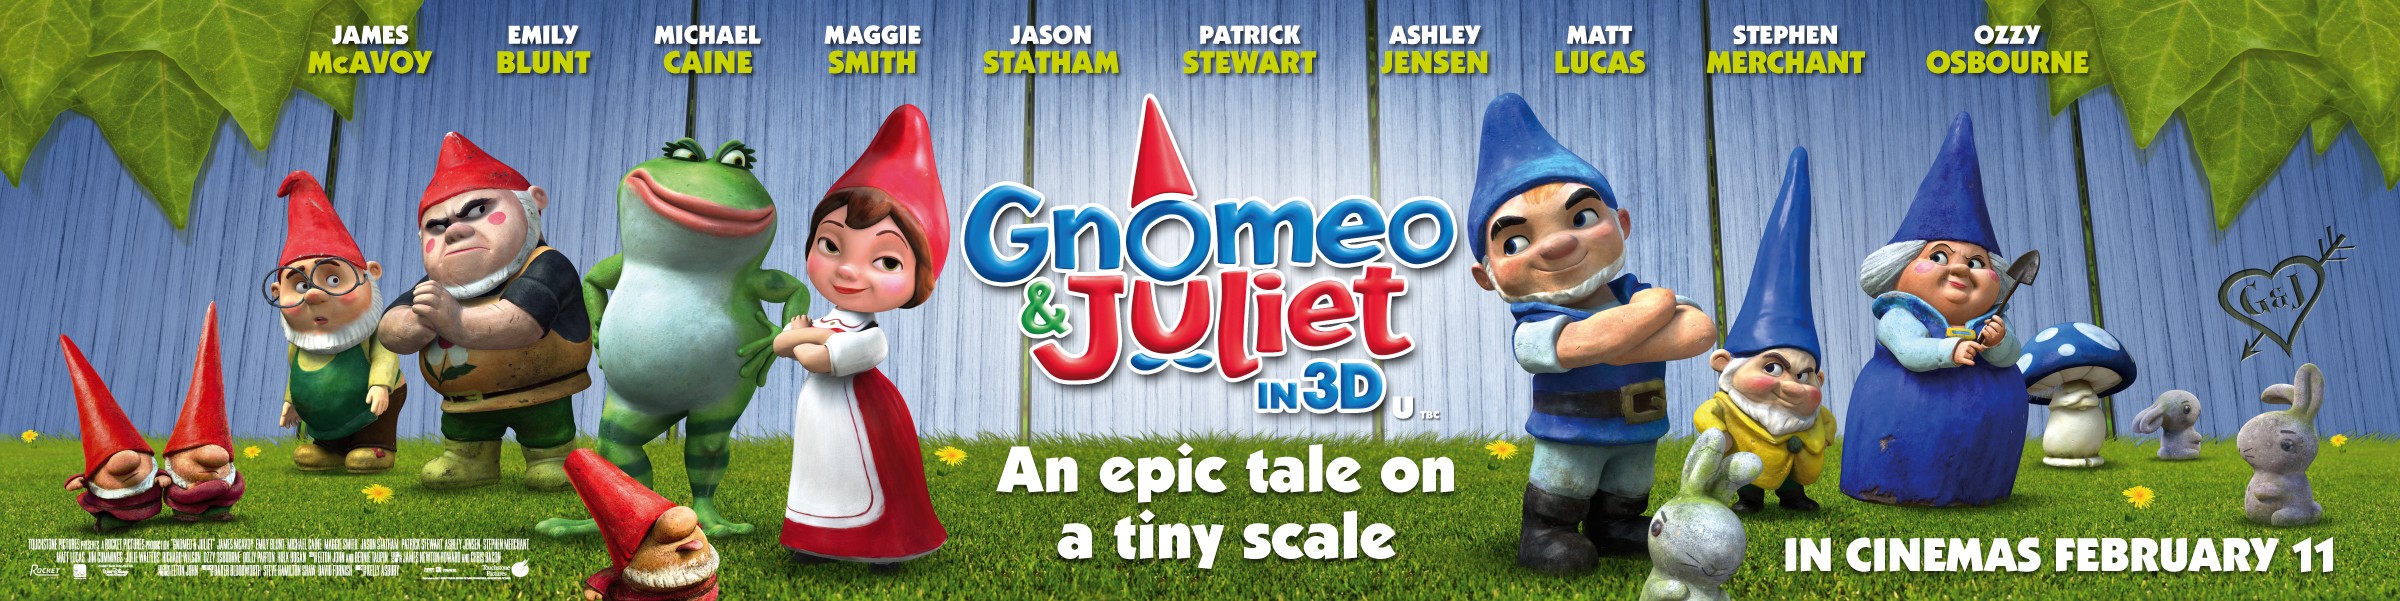 Mega Sized Movie Poster Image for Gnomeo and Juliet (#17 of 17)